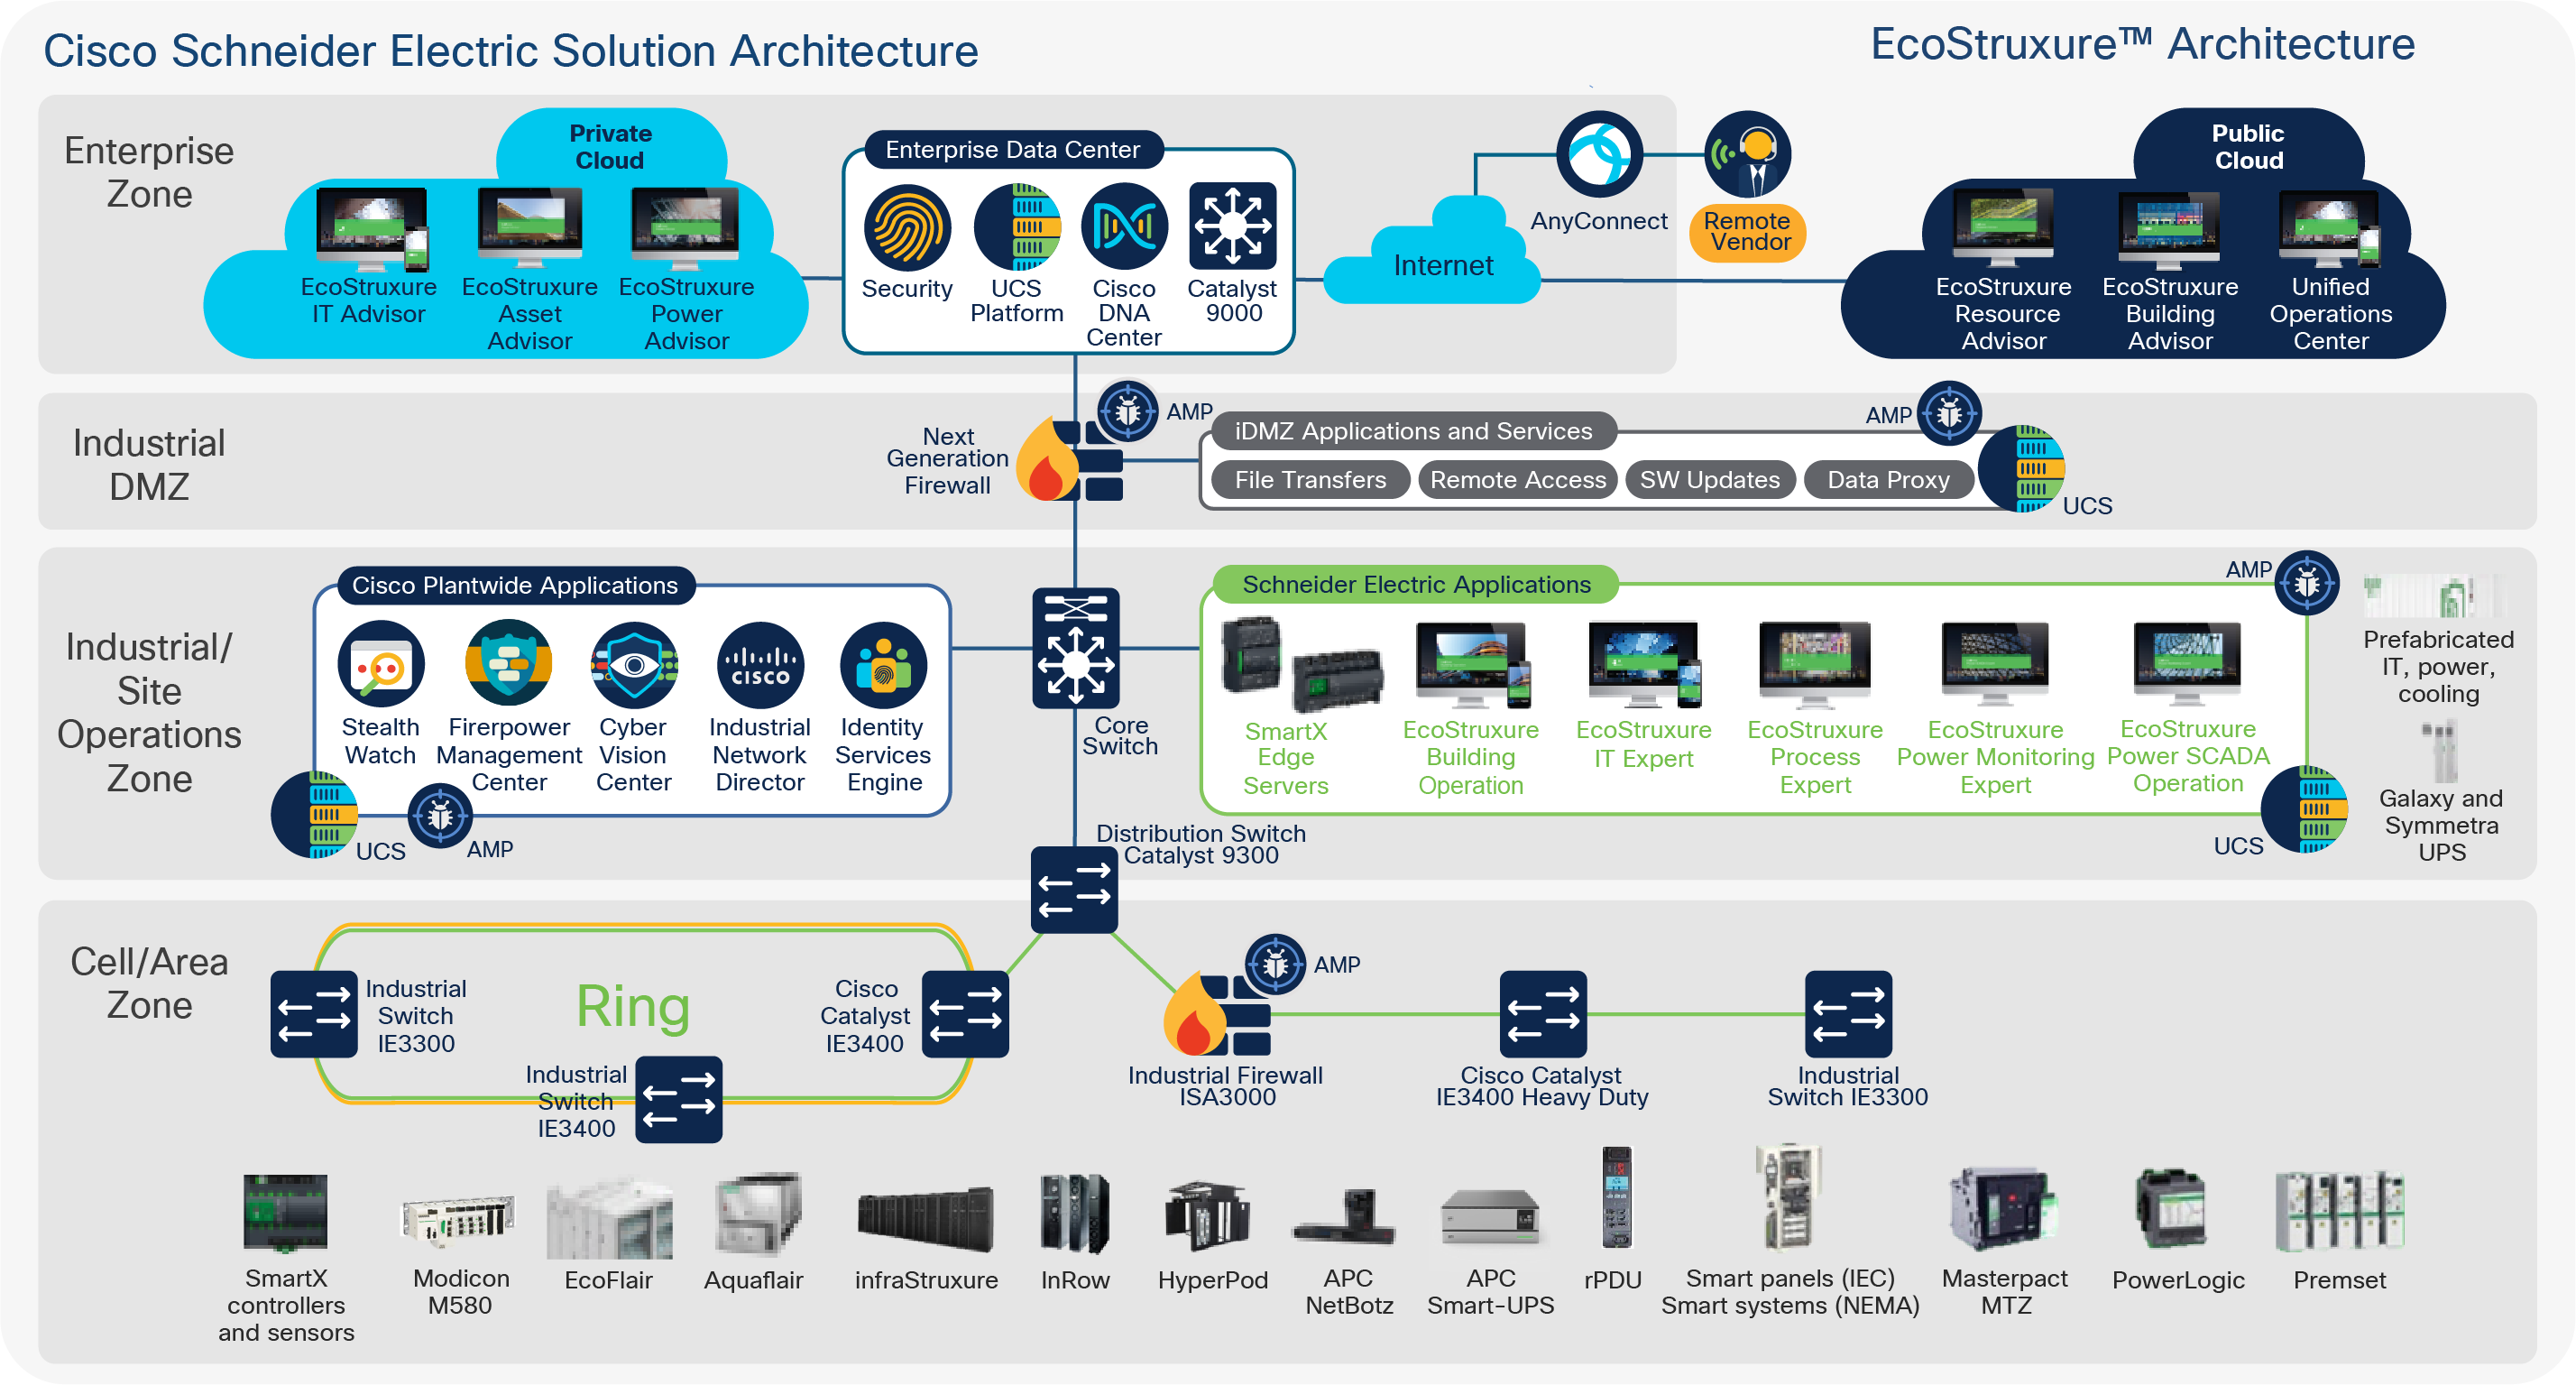 Cisco and Schneider Electric OT/IT industrial automation reference architecture